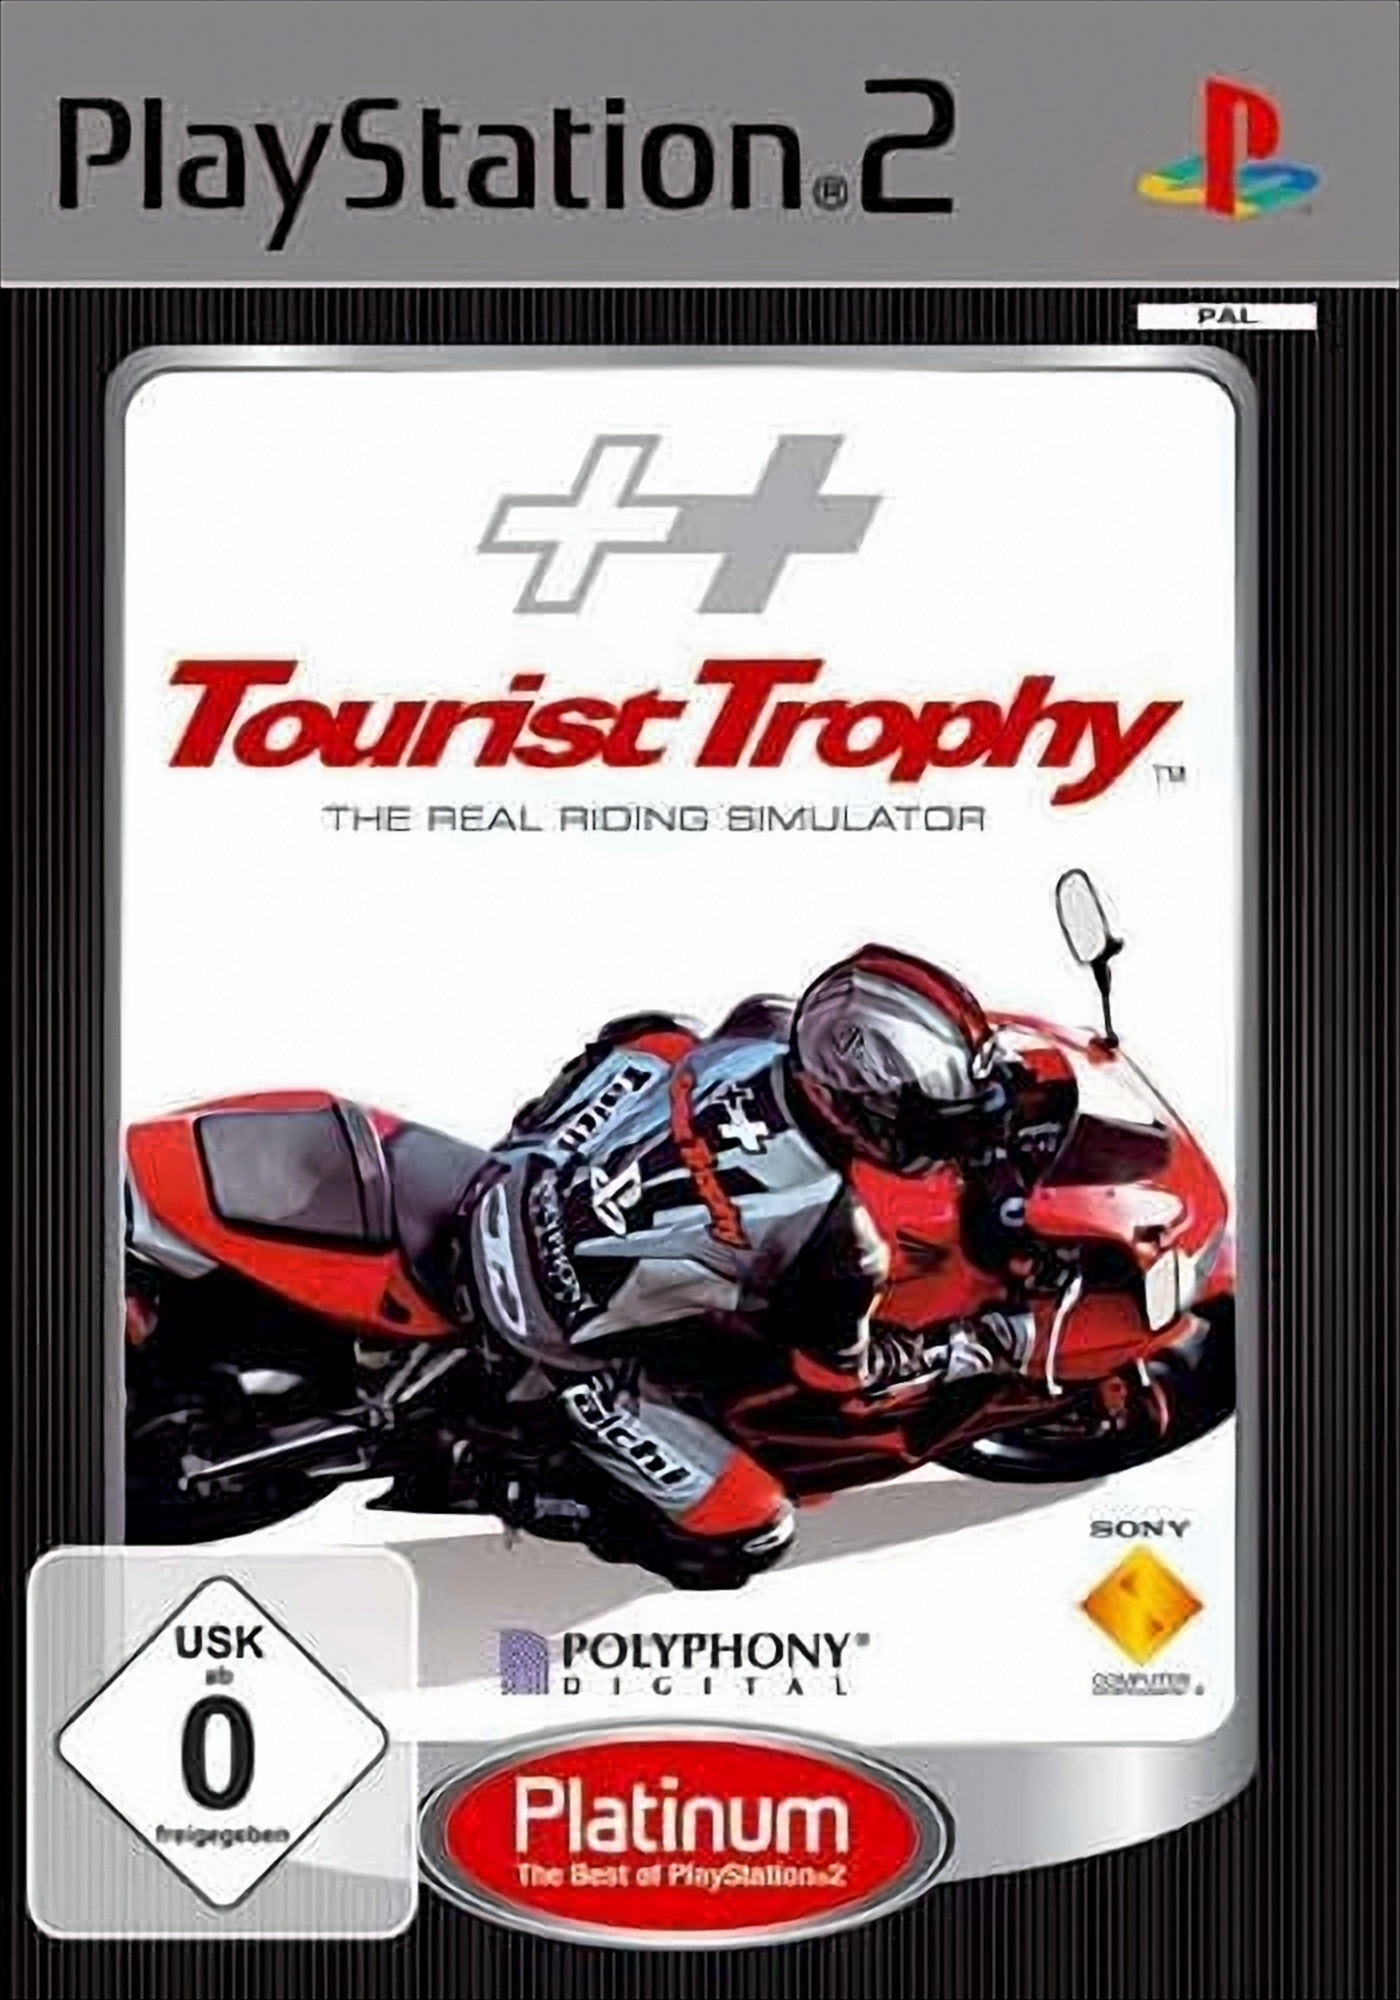 Simulator Riding 2] [PlayStation - Trophy Real Tourist - The